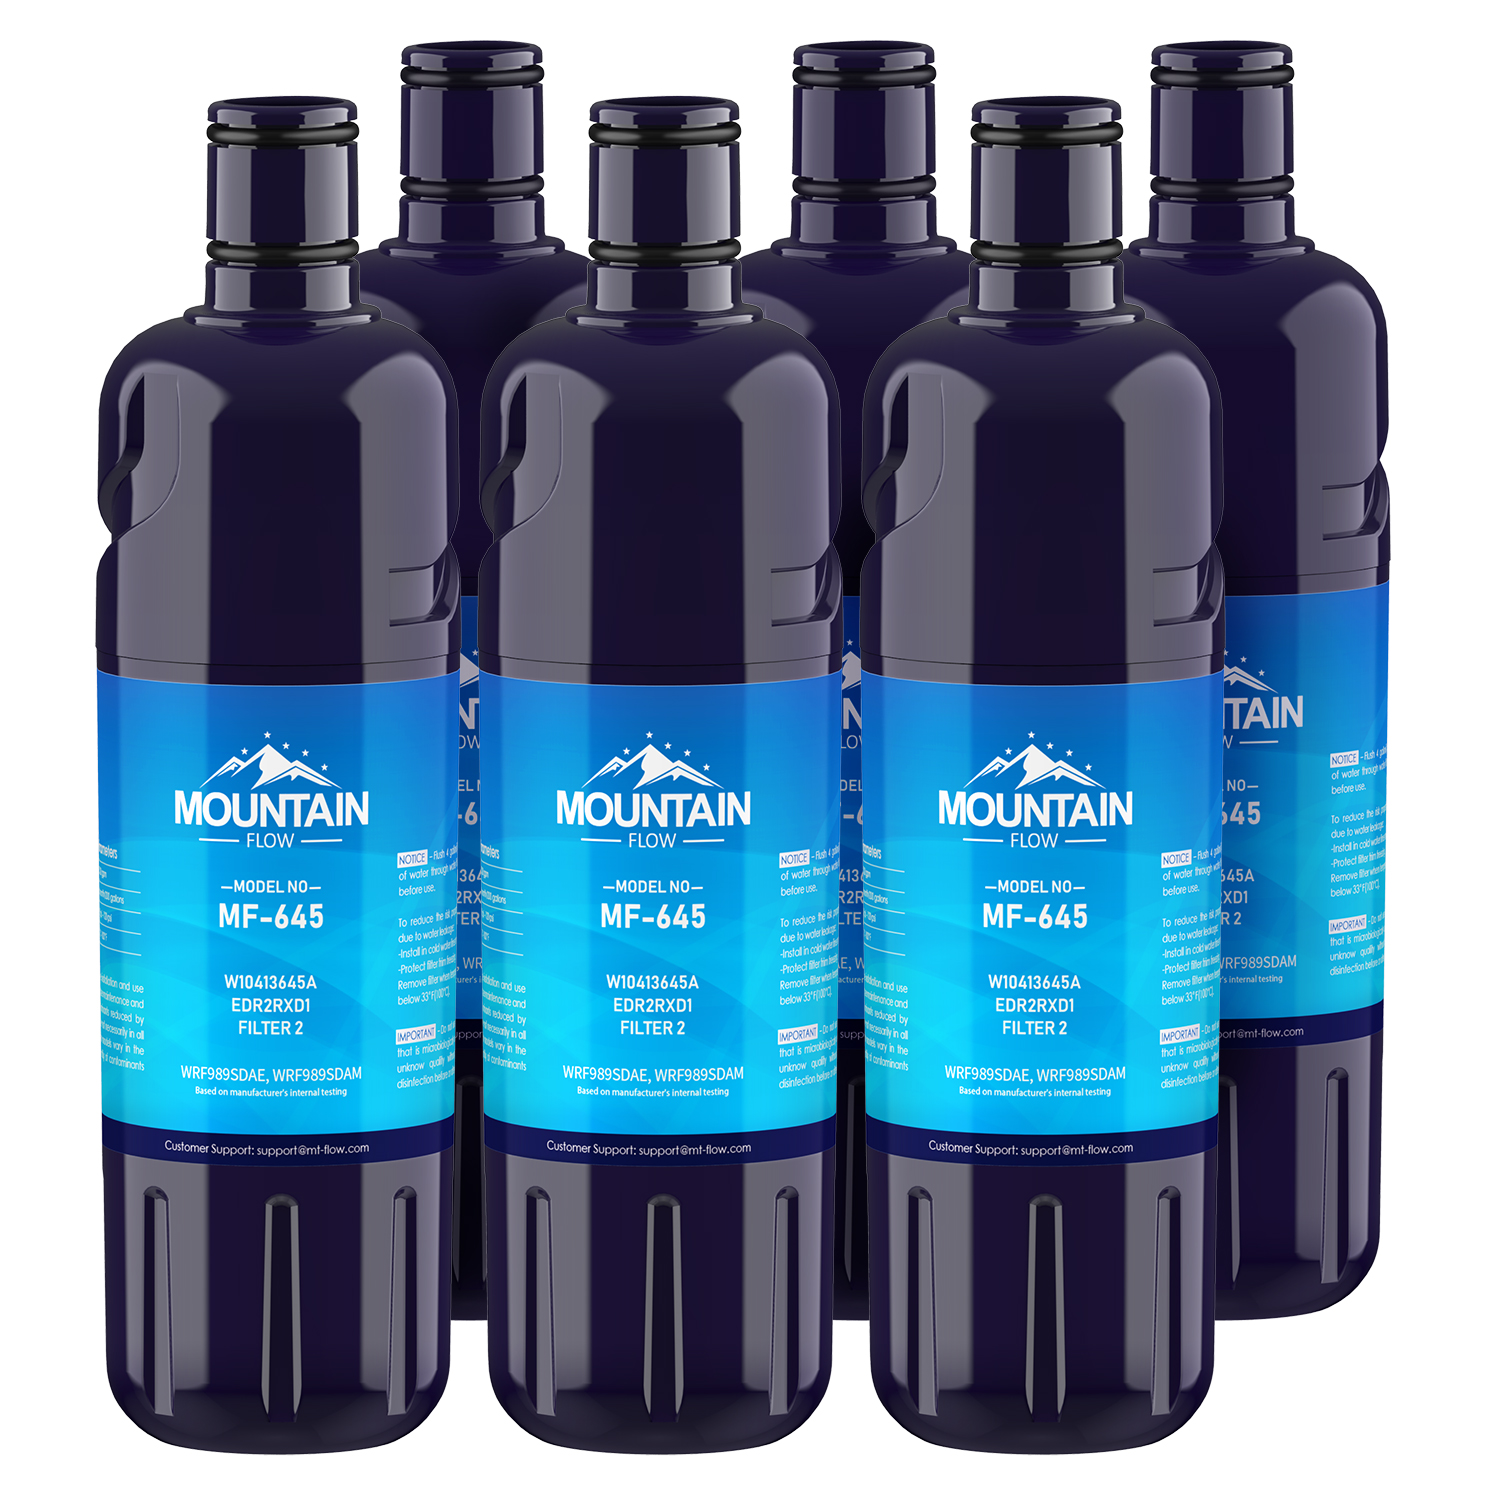 Mountain Flow w10413645a, Edr2rxd1 Water Filter, Filter 2 (6 Pack)